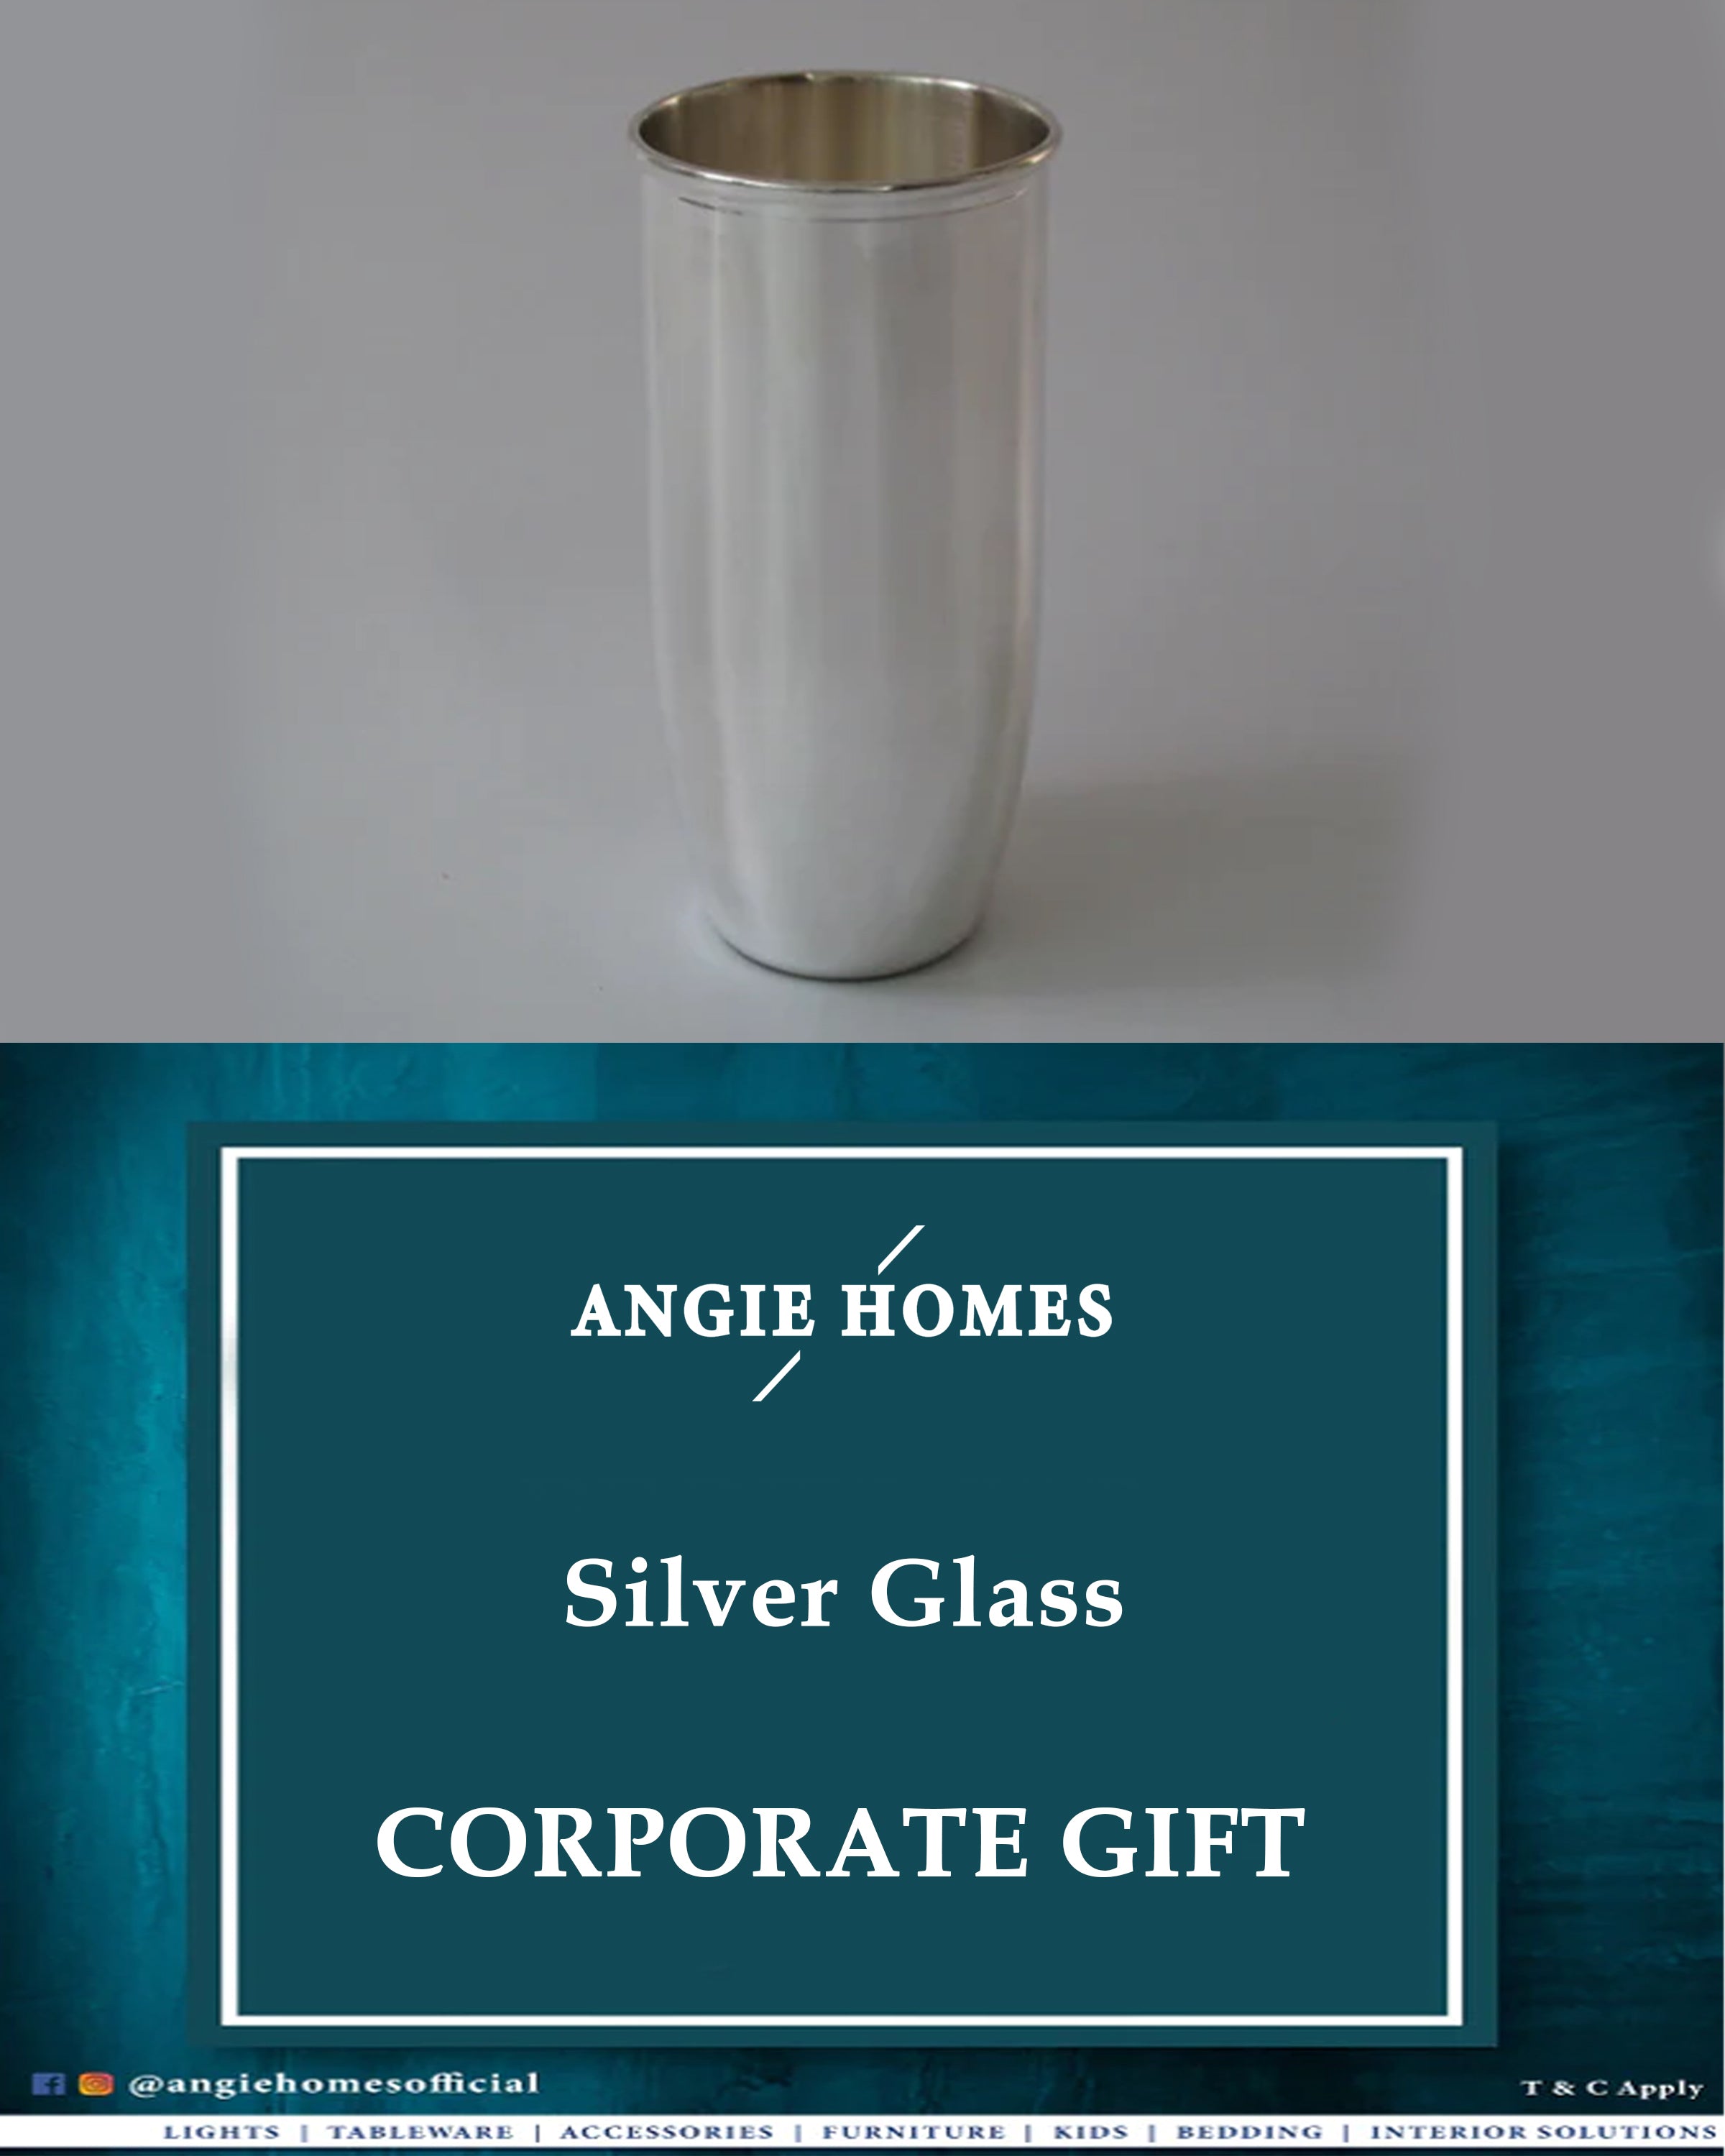 Silver Glass for Weddings, House Warming & Corporate Gifts ANGIE HOMES